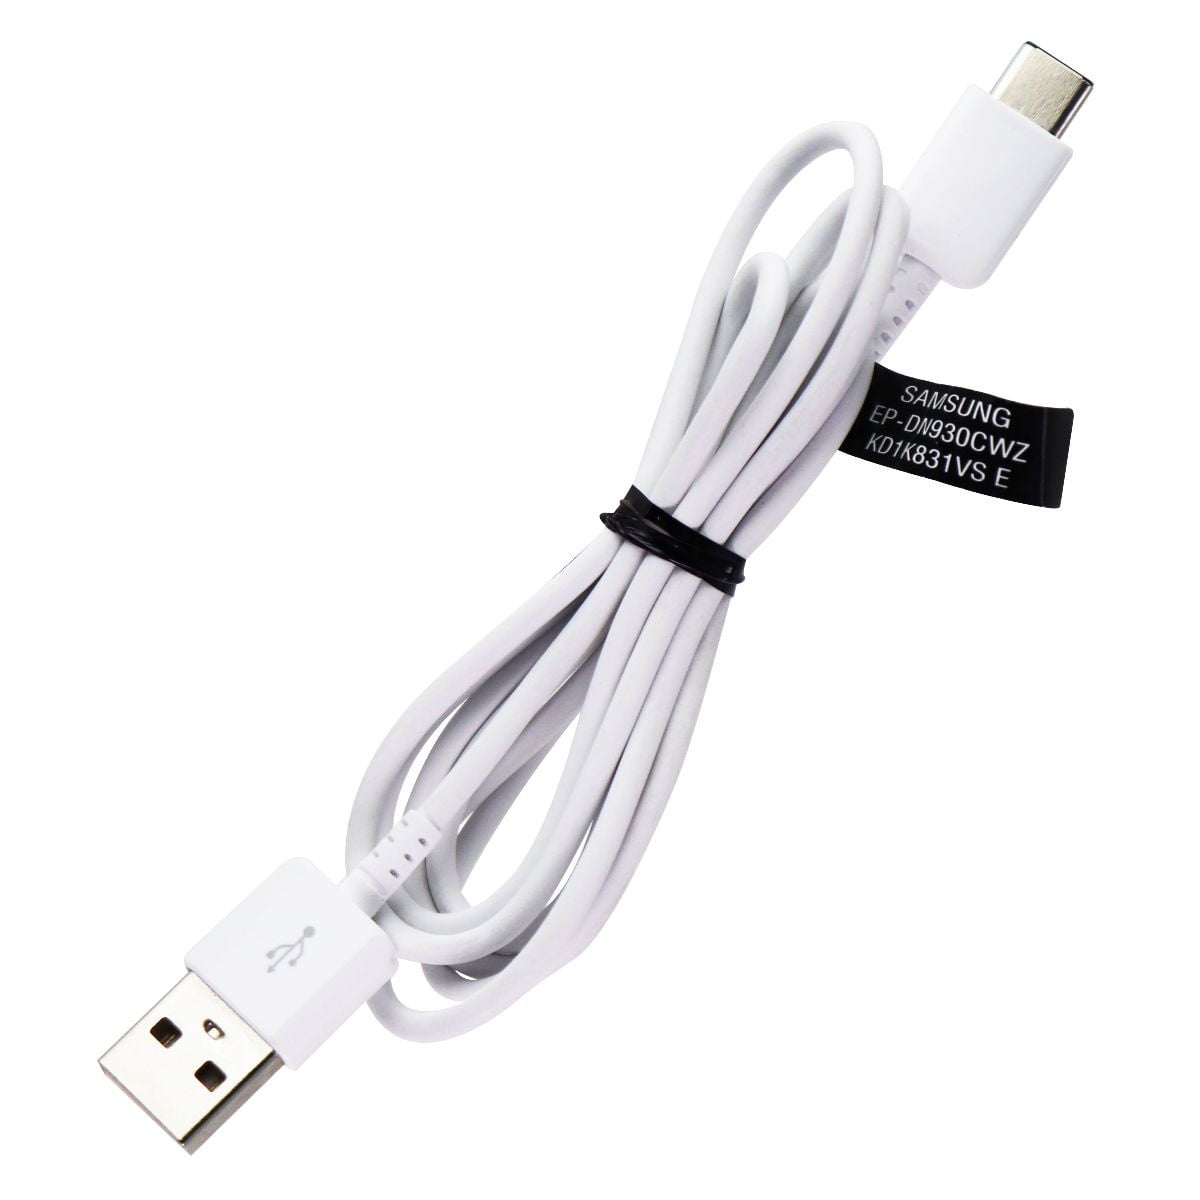 Champagne Absoluut Revolutionair Samsung (3.3-Ft) USB-C to USB Charge / Sync OEM Cable - White (EP-DN930CWZ)  (Used) - Walmart.com